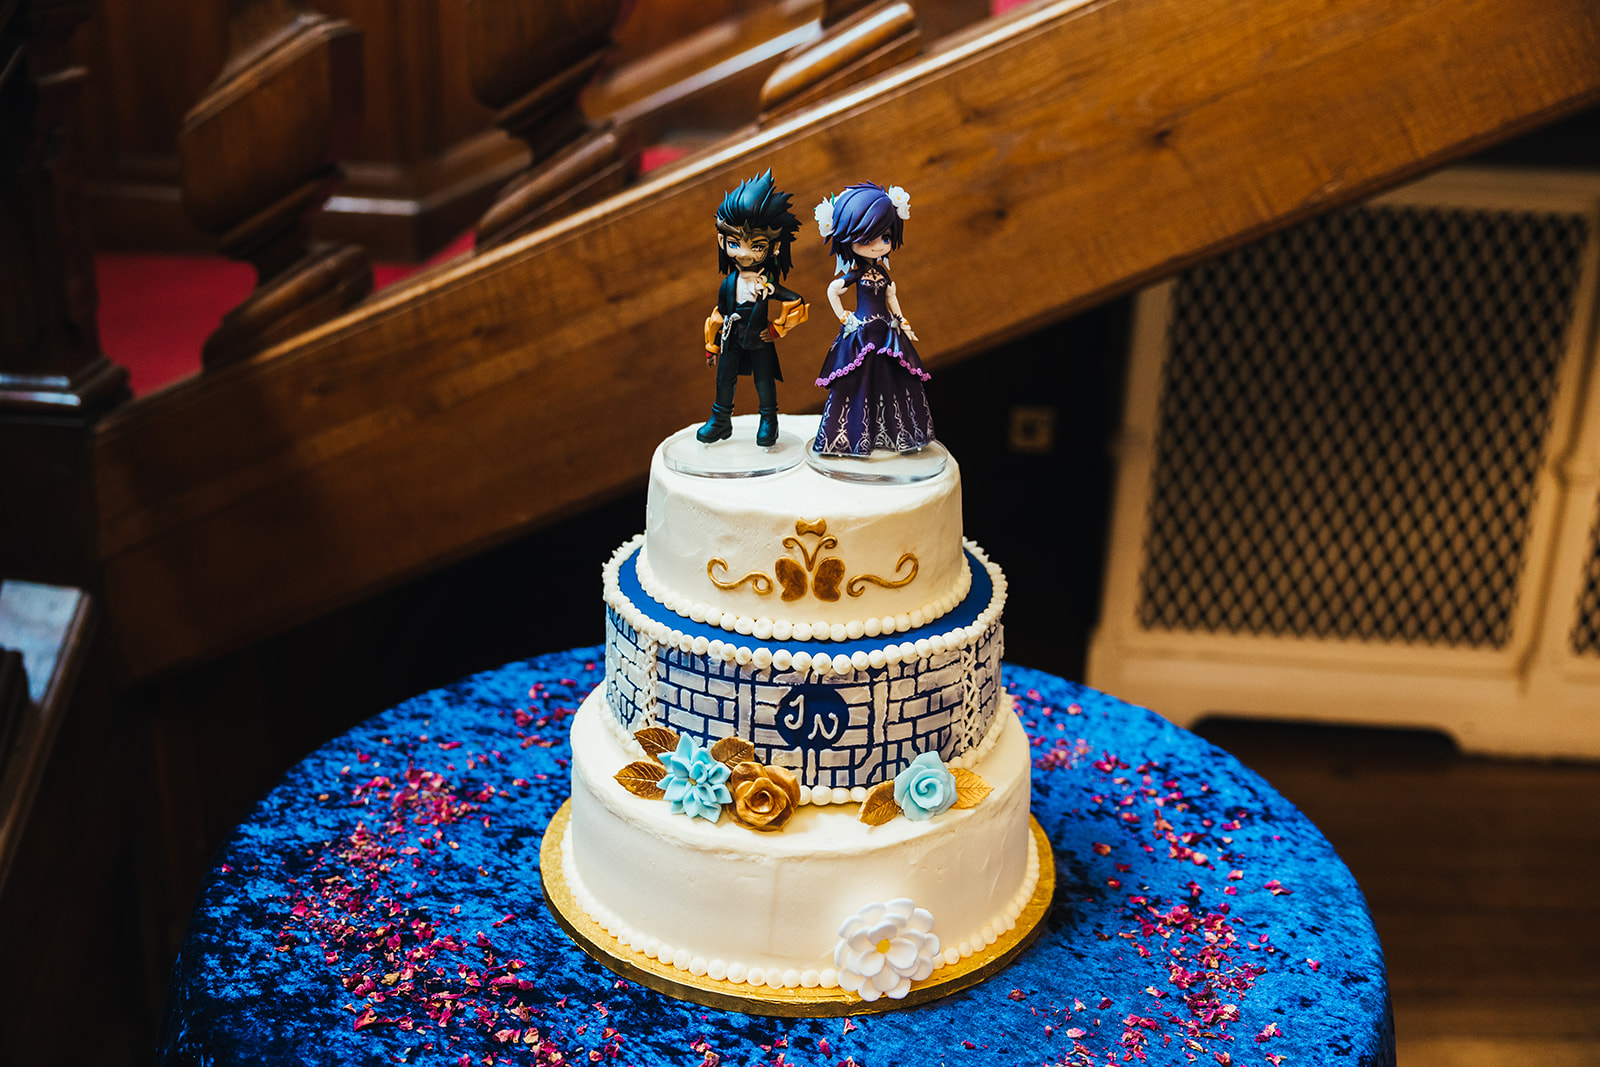 Photo by Kirsty Rockett Photography. Our wedding cake made by our friend Nell! Complete with a blue velvet table cloth, and with the lattice inspiration in the second tier.